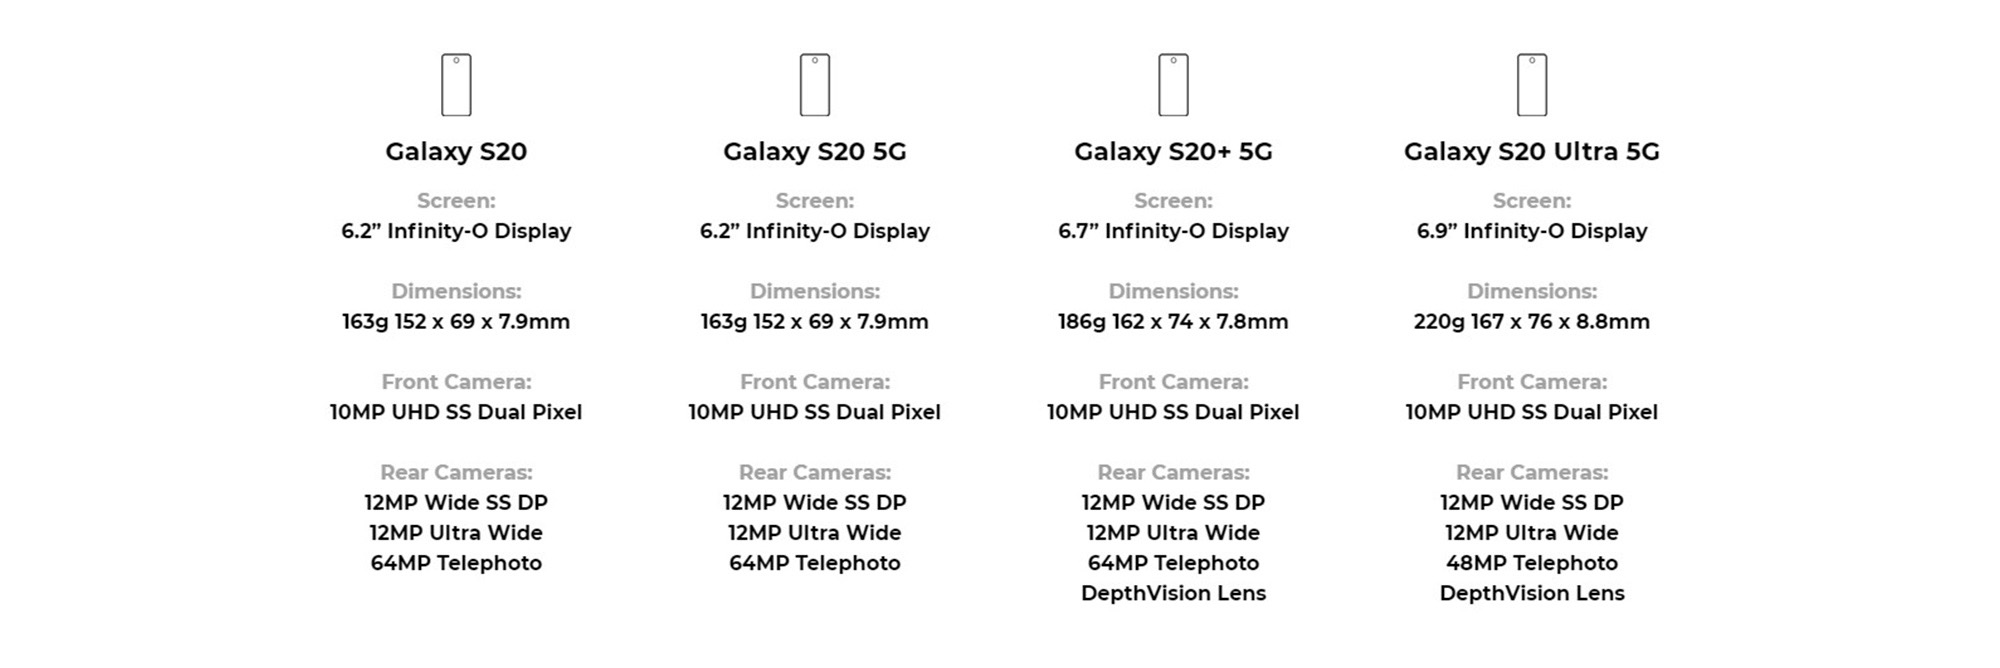 Samsung Galaxy s20 differences